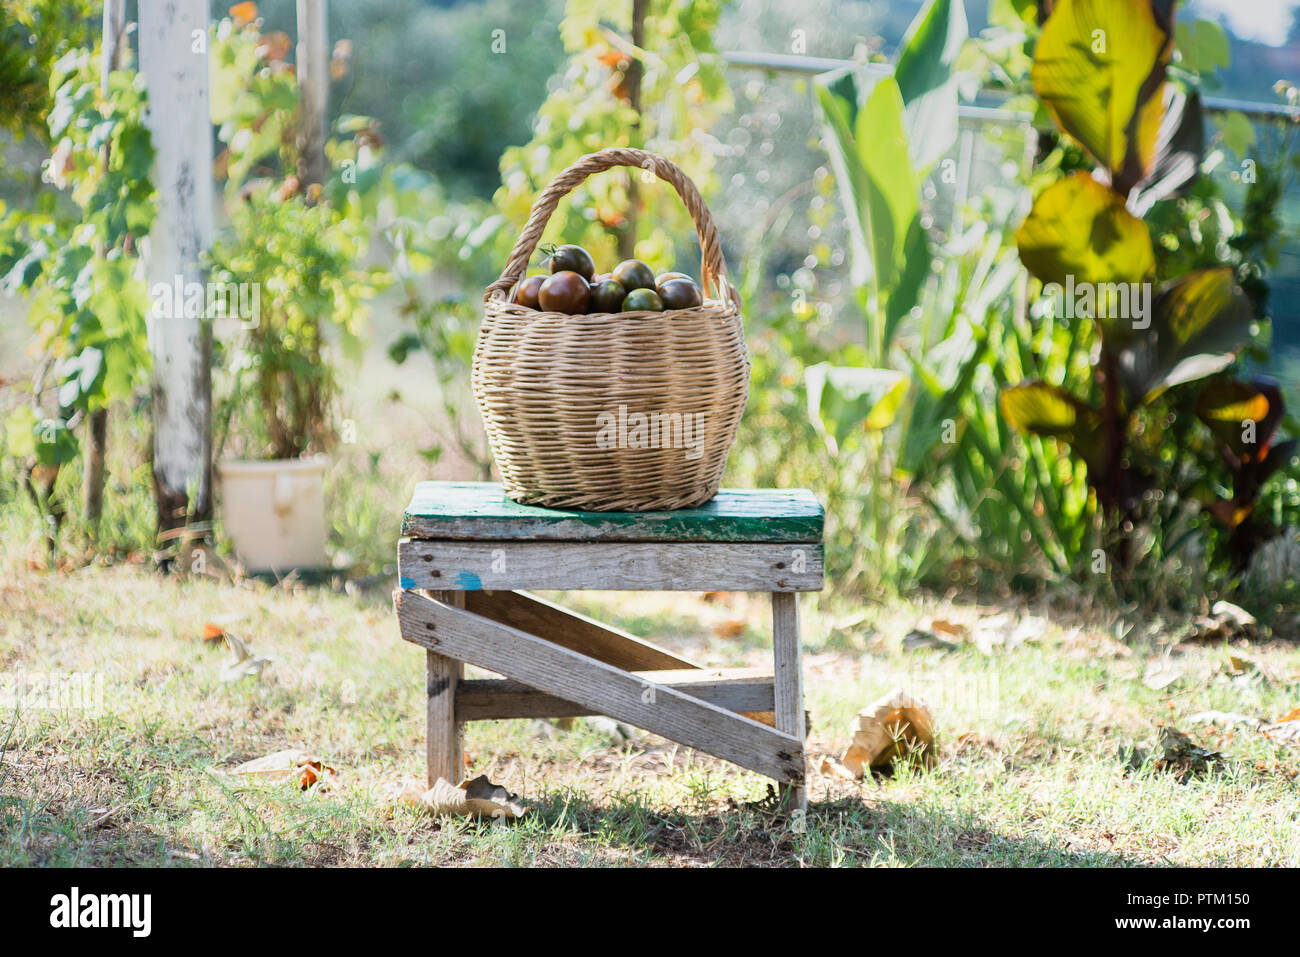 A wooden basket full of organic green zebra tomatoes from the vegetable garden, South of Italy. Stock Photo